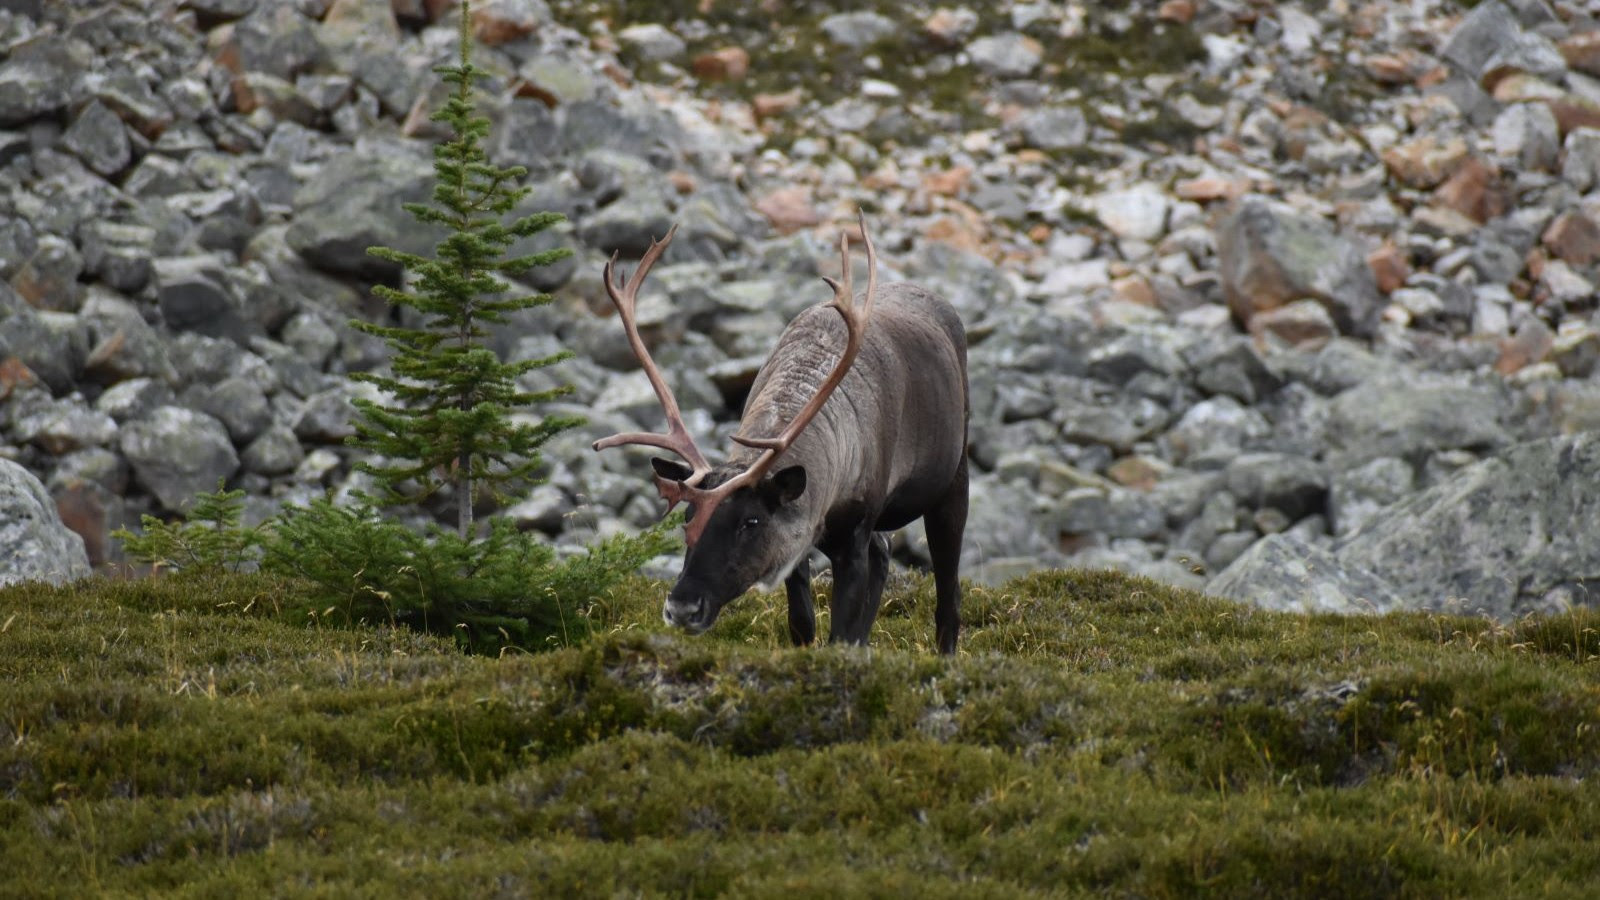 A woodland caribou is shown head down, facing the camera. It is foraging for food in a green sub-alpine meadow, with a rocky slope in the background. The caribou is dark brown in colour, with large antlers.